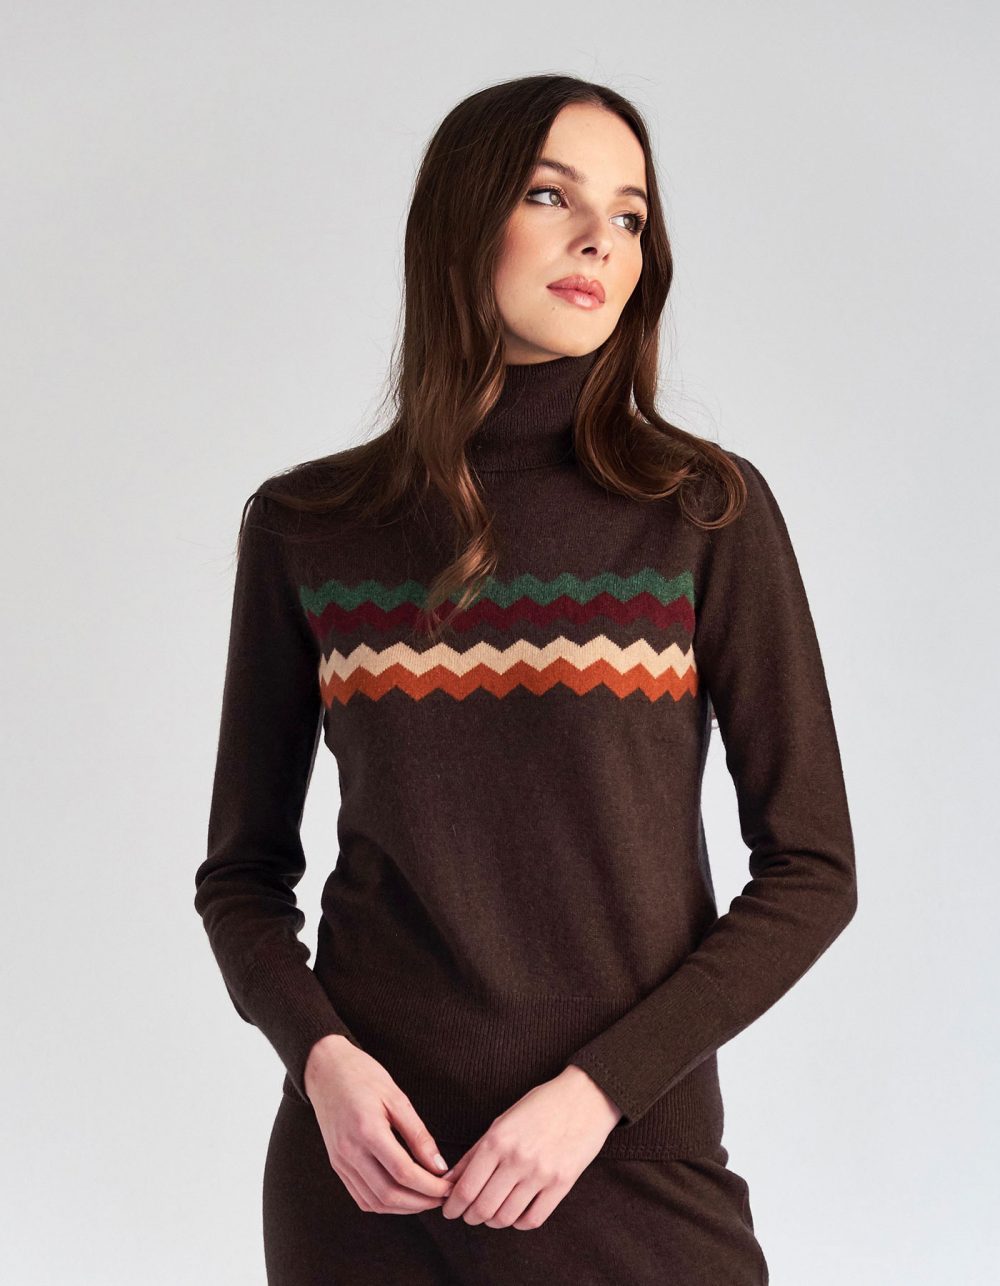 Woman wearing a designer cashmere jumper decorated with zigzag patterns.